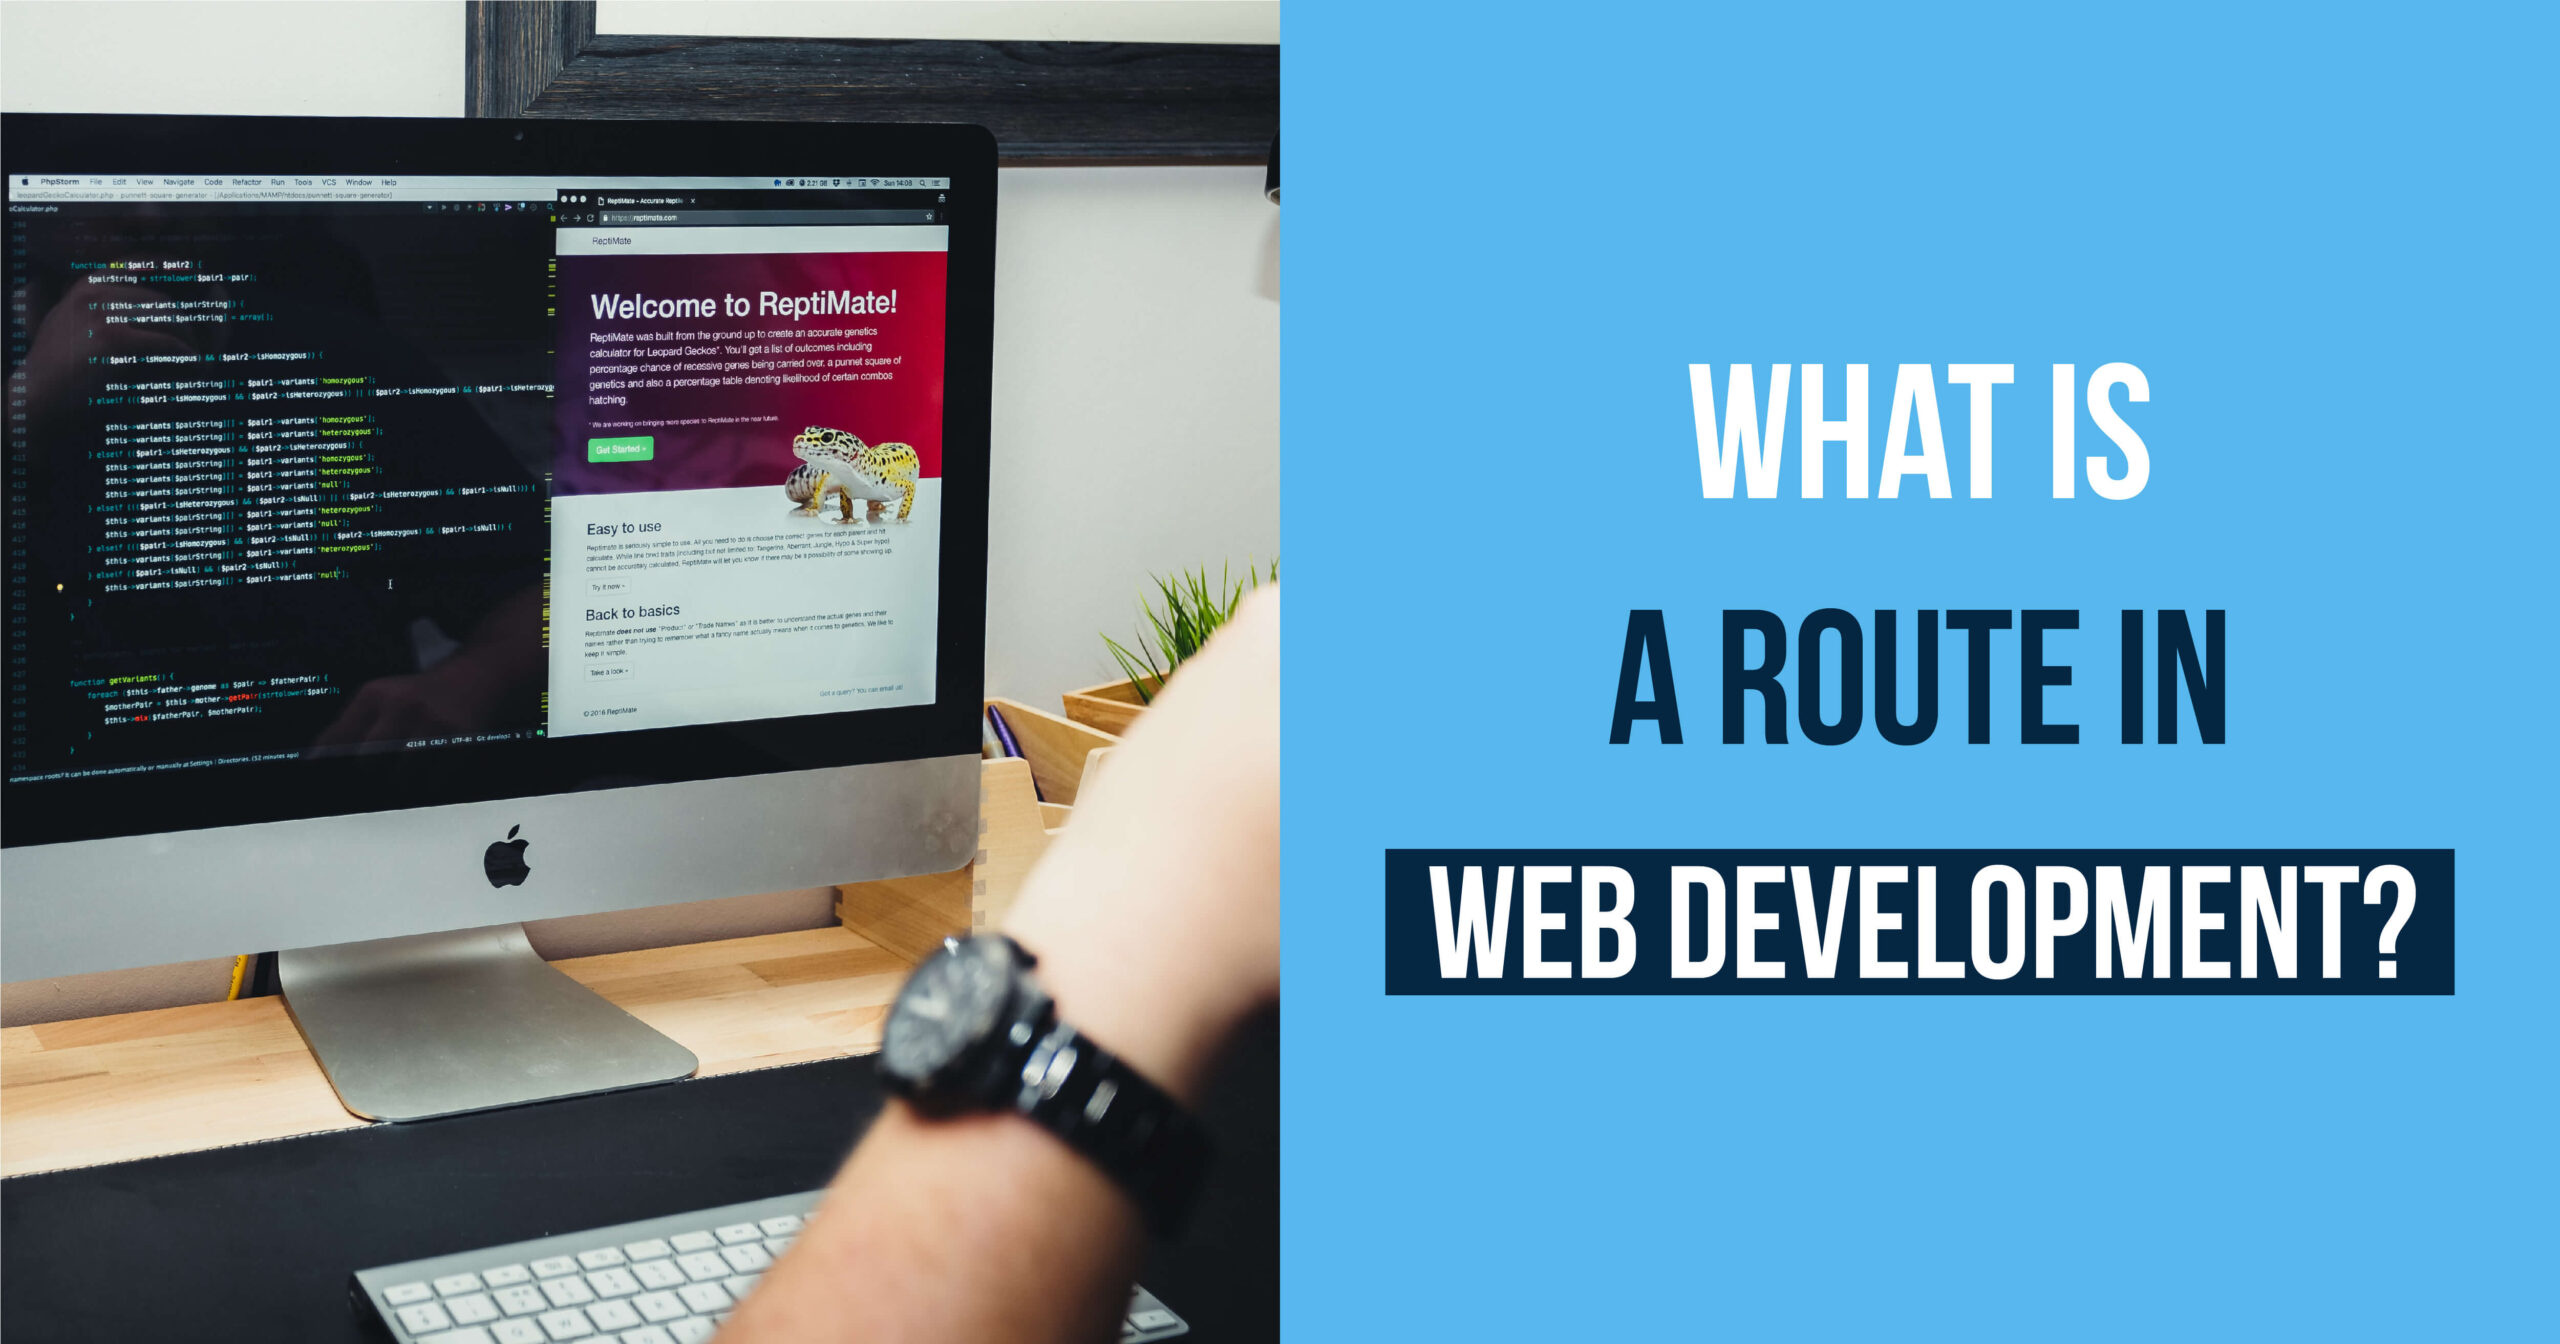 What is a Route in Web Development